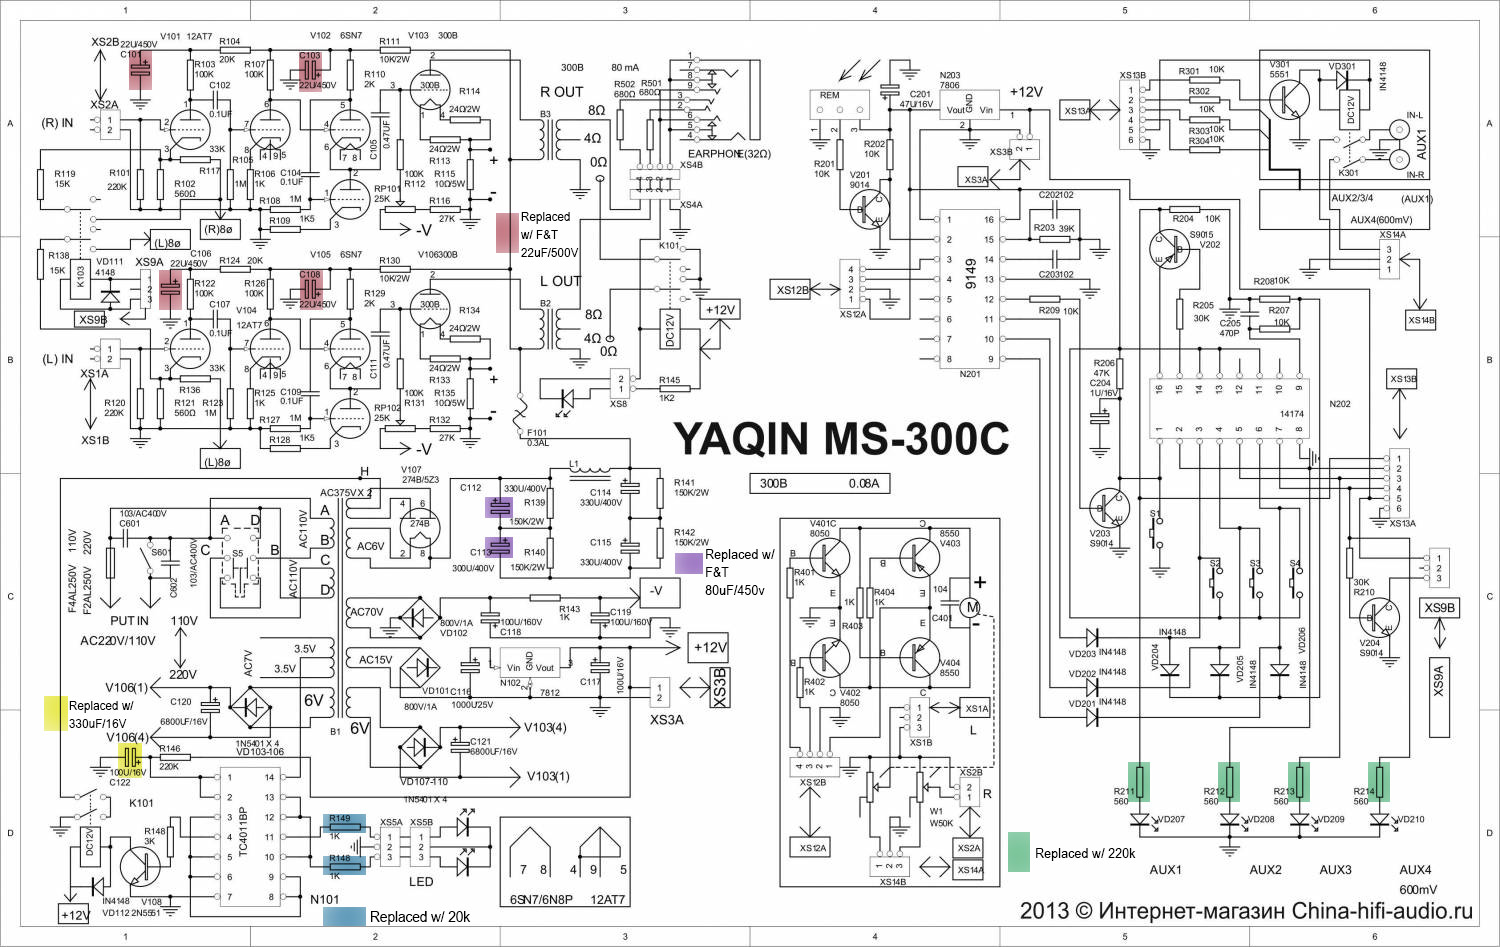 MS-300C Schematic with capacitor and resistor modifications